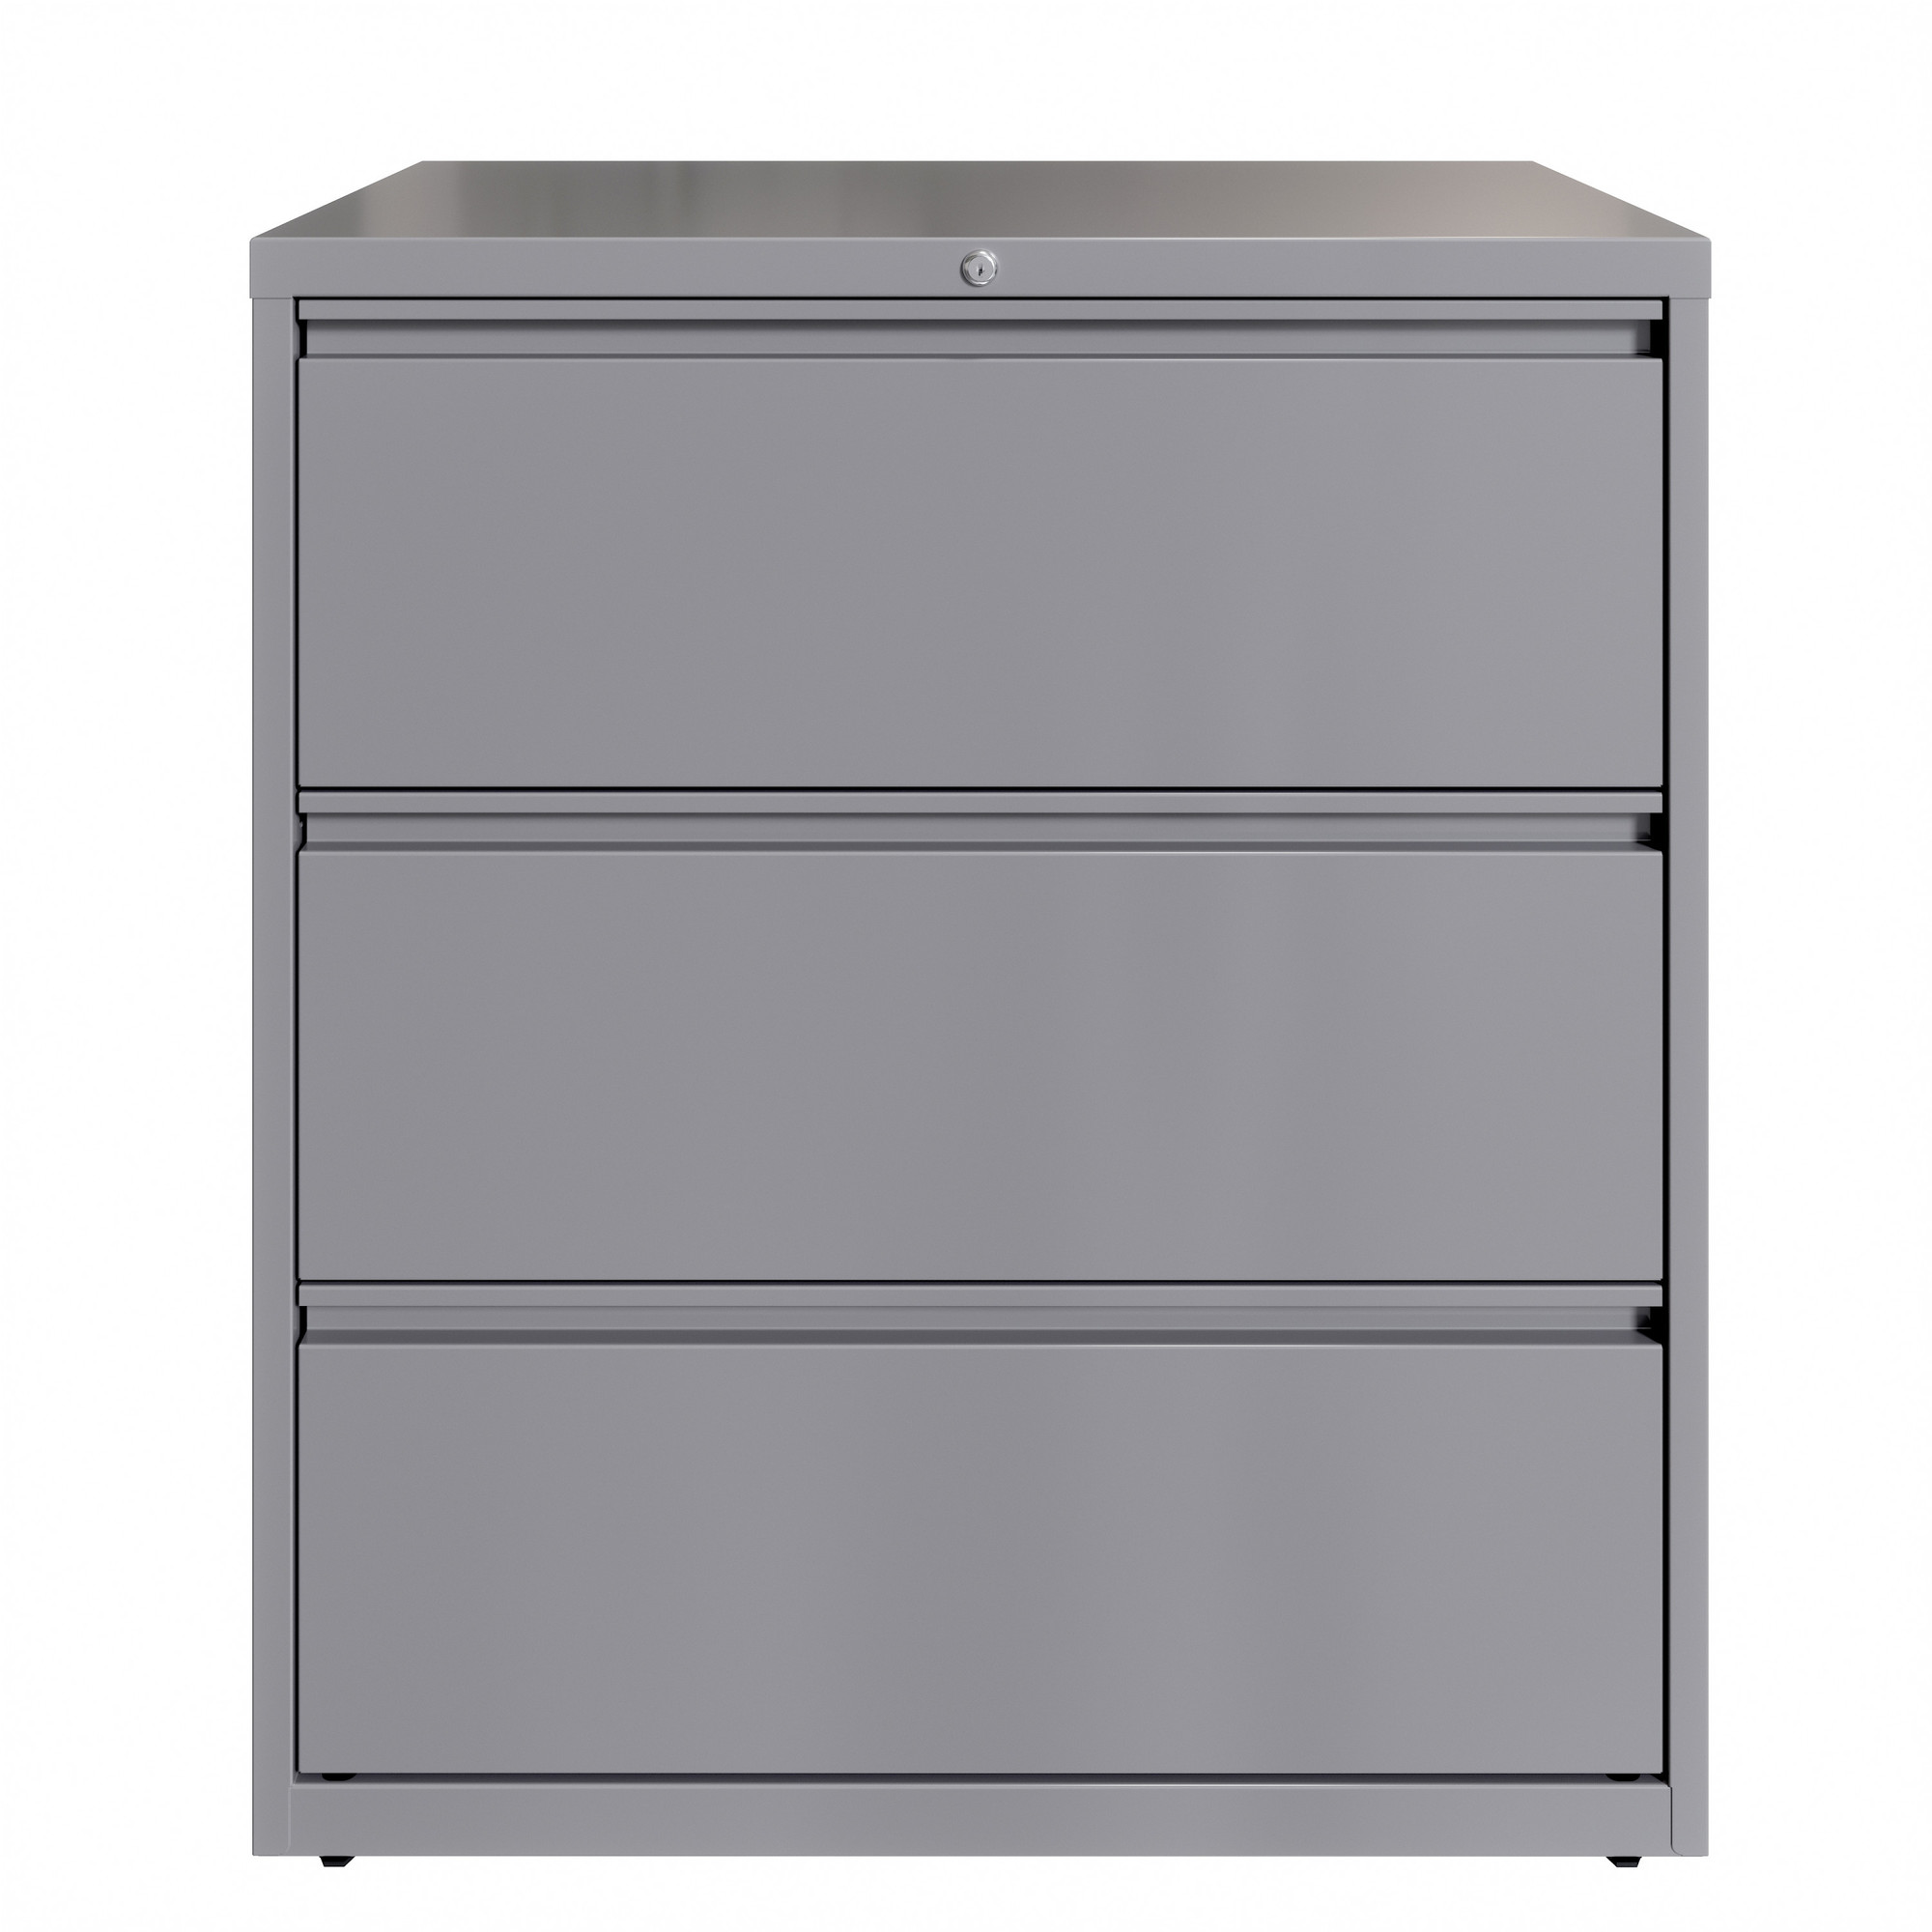 Hirsh Industries, 3 Drawer Lateral File Cabinet, Width 36 in, Depth 18.625 in, Height 40.25 in, Model 23745